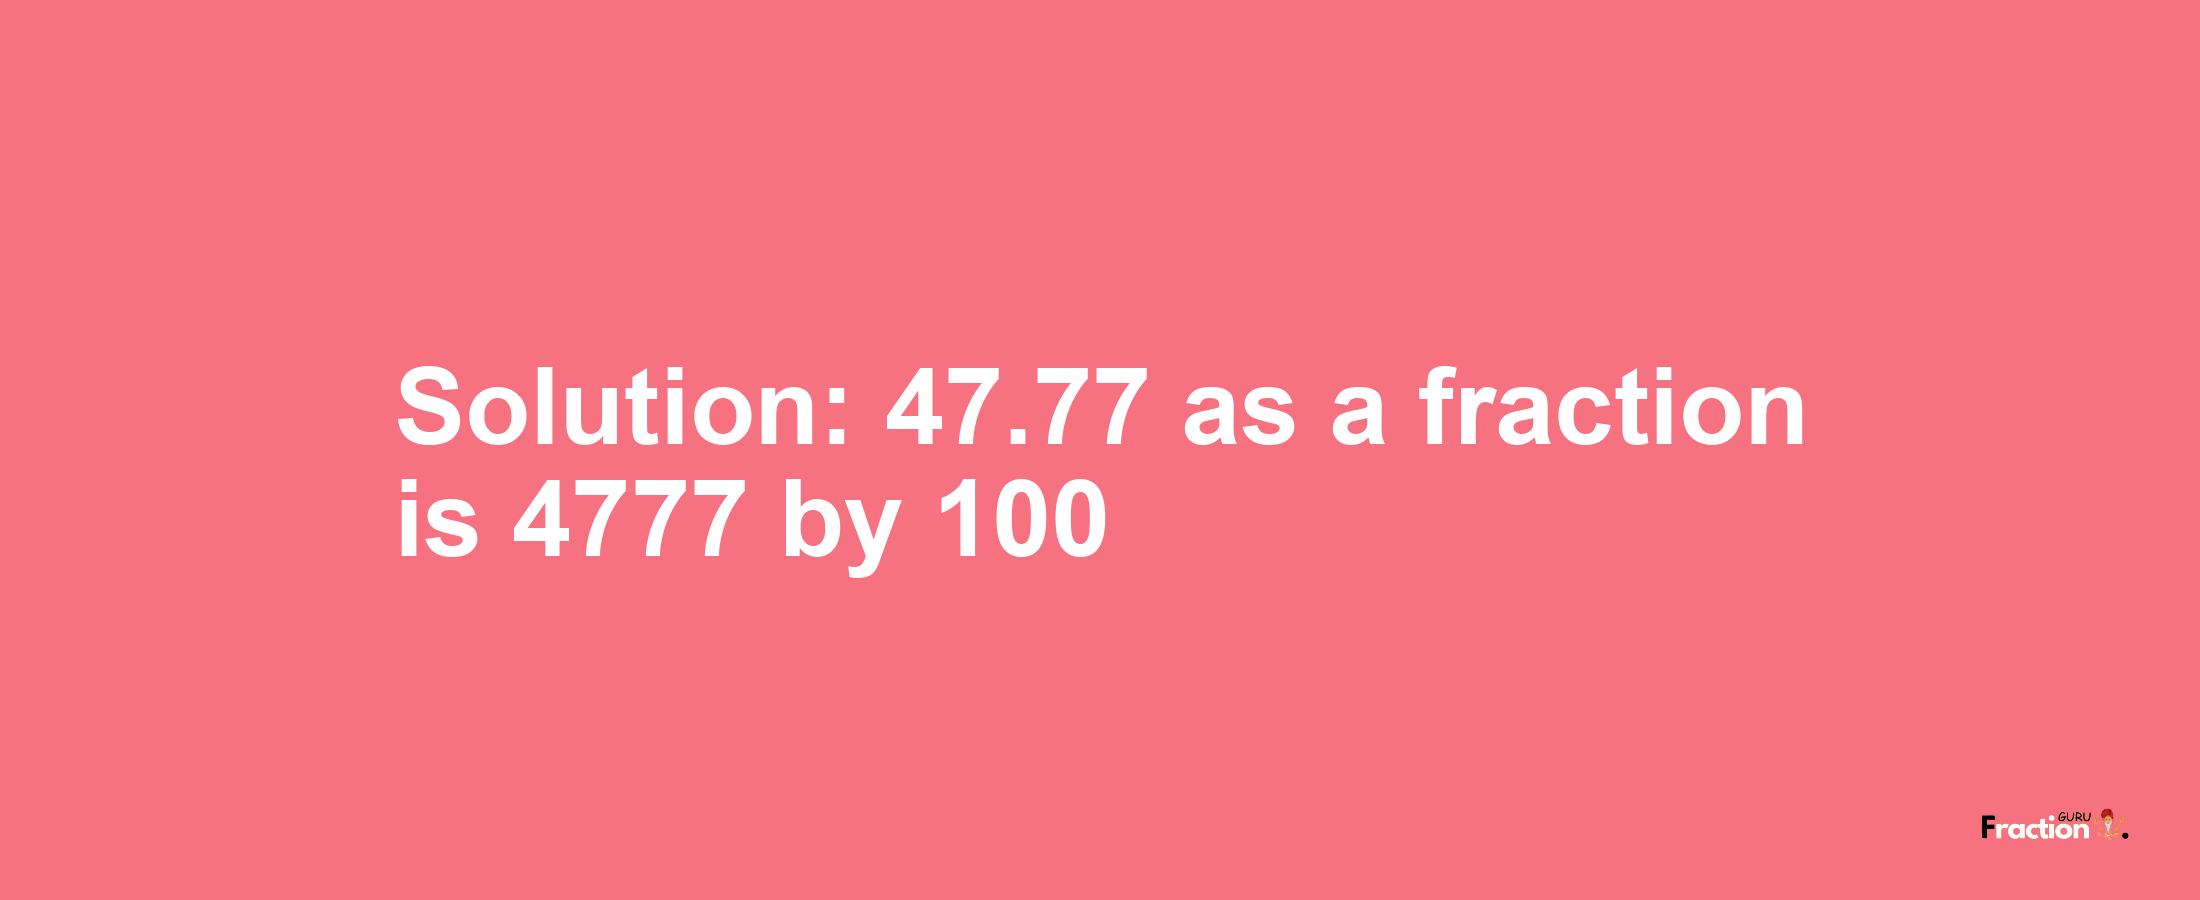 Solution:47.77 as a fraction is 4777/100